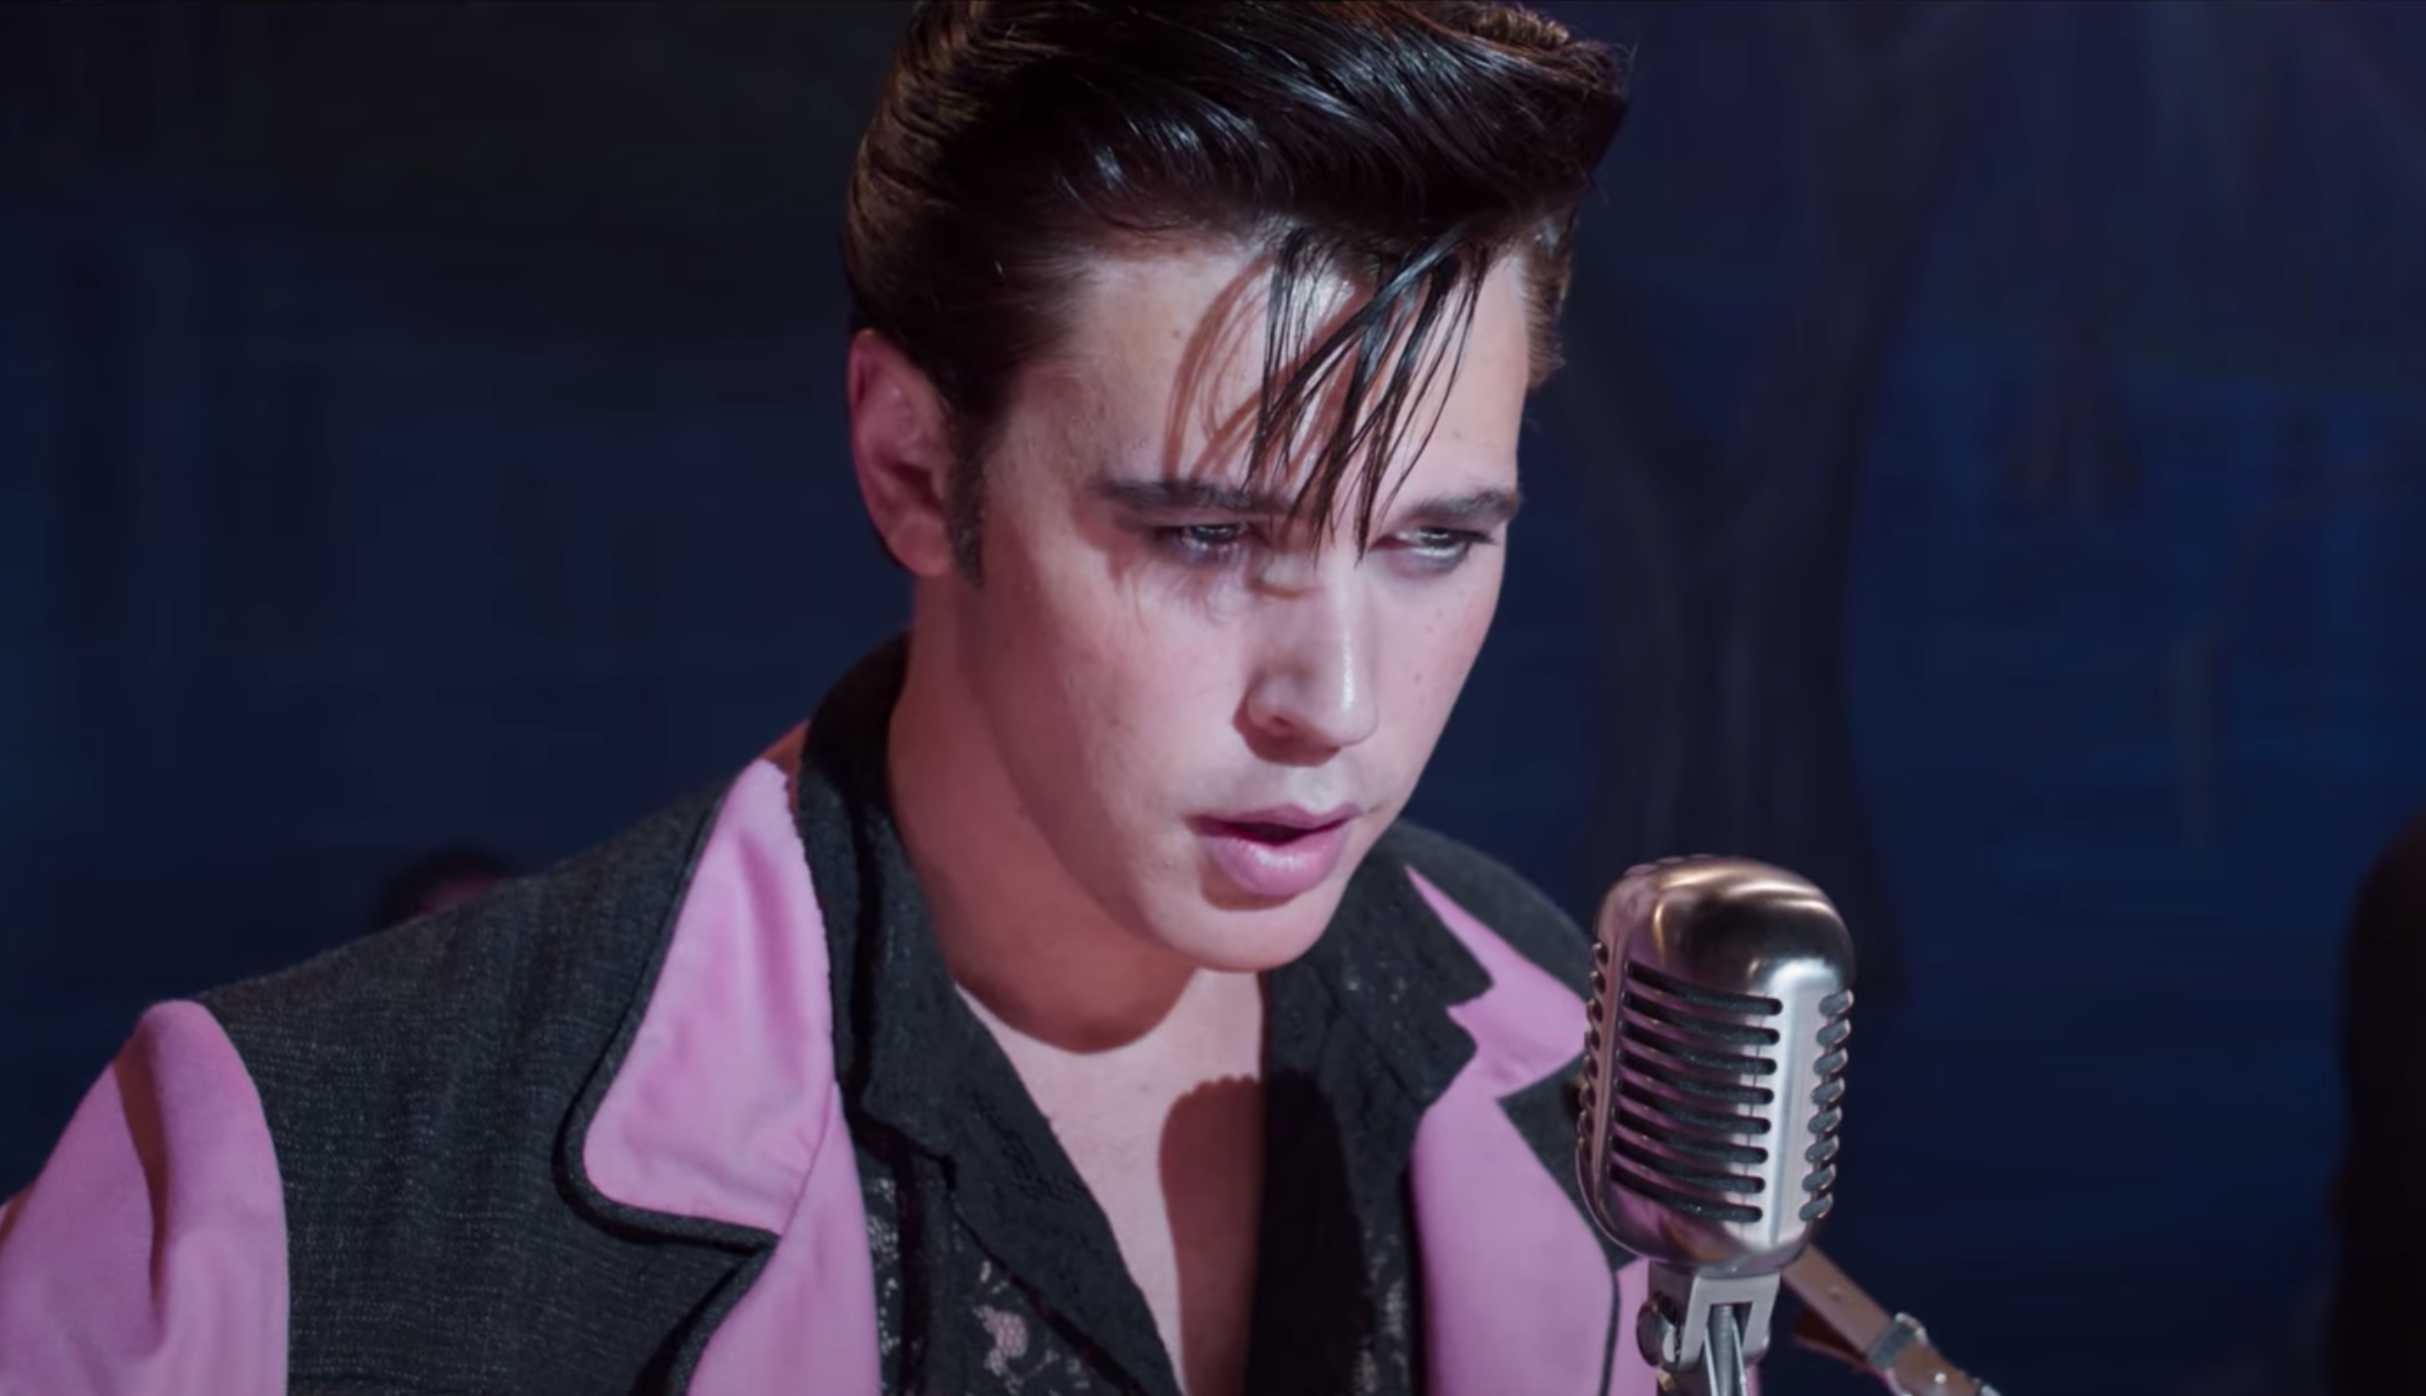 Elvis Trailer - check out Austin Butler's transformation into The King of Rock and Roll in the second trailer for the upcoming biopic